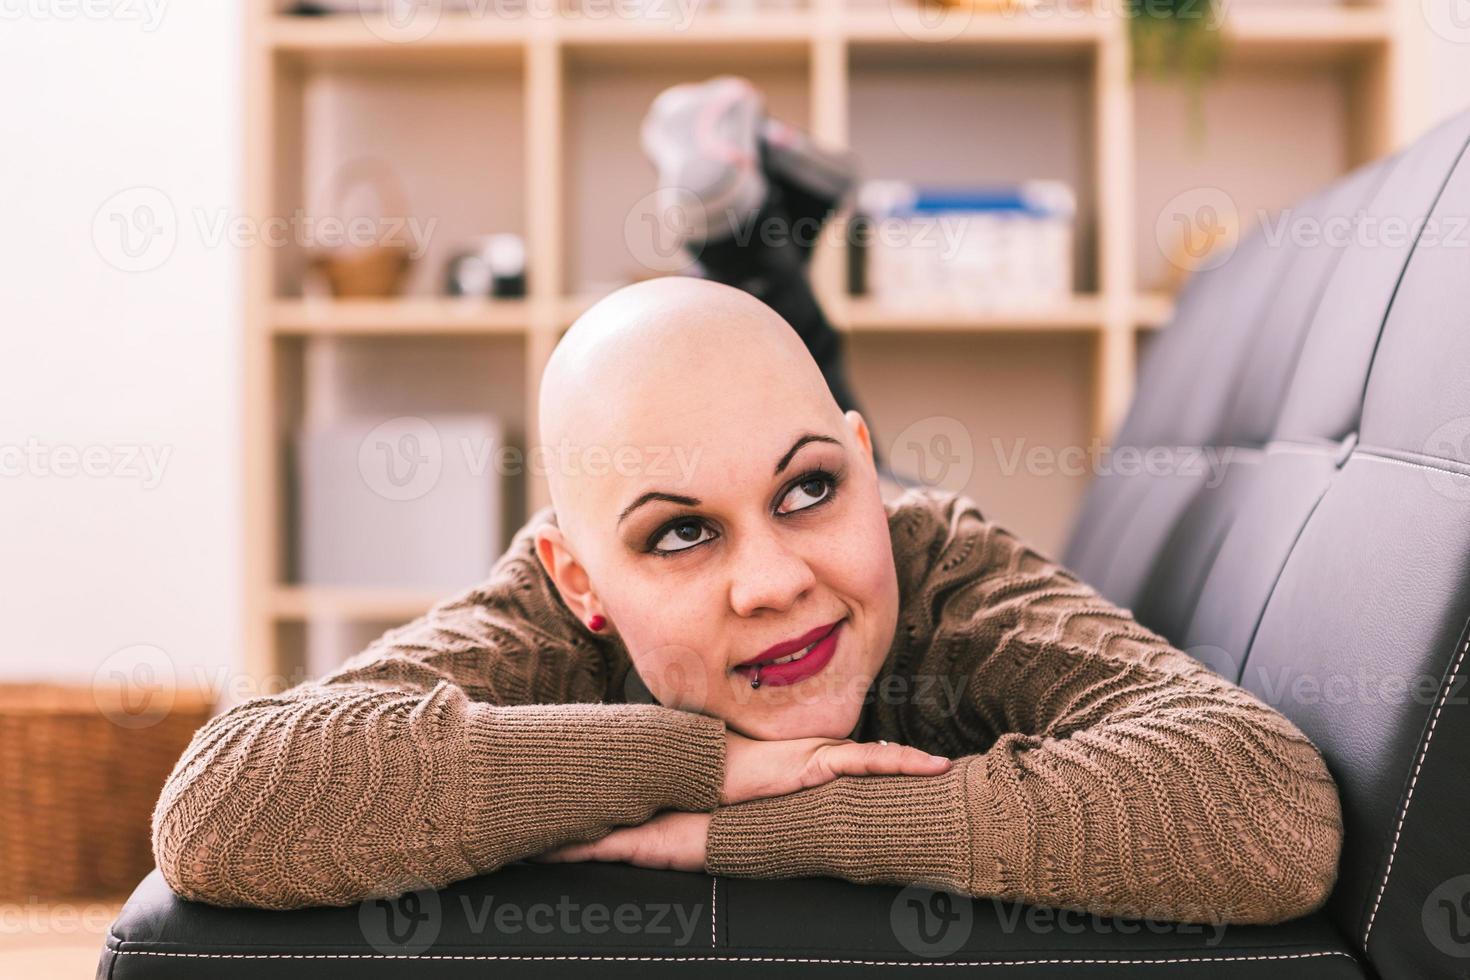 Young woman is overcoming cancer at home photo